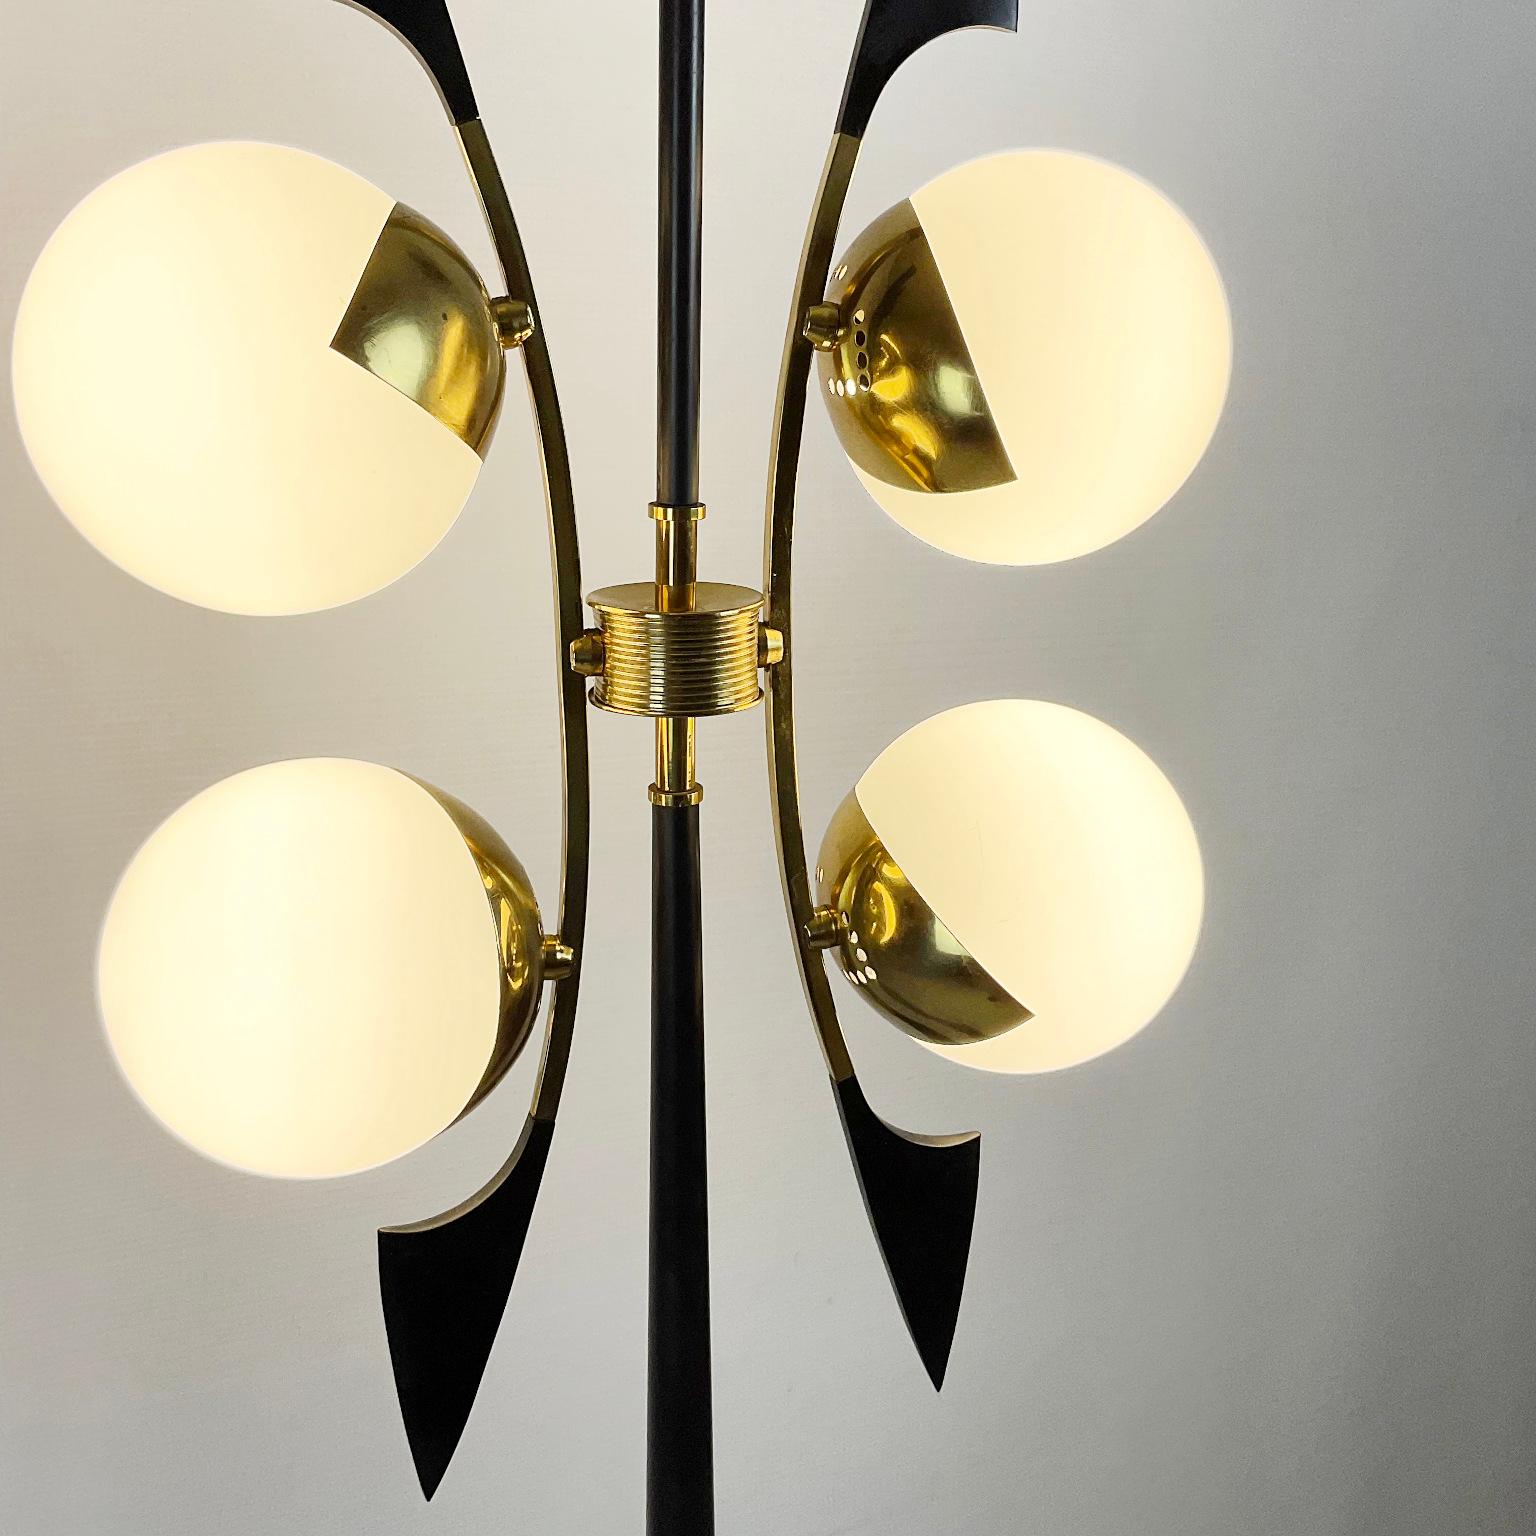 Cast 1950s Floor Lamp Edited by Maison Arlus with Four Globes and Brass Saber Finish For Sale